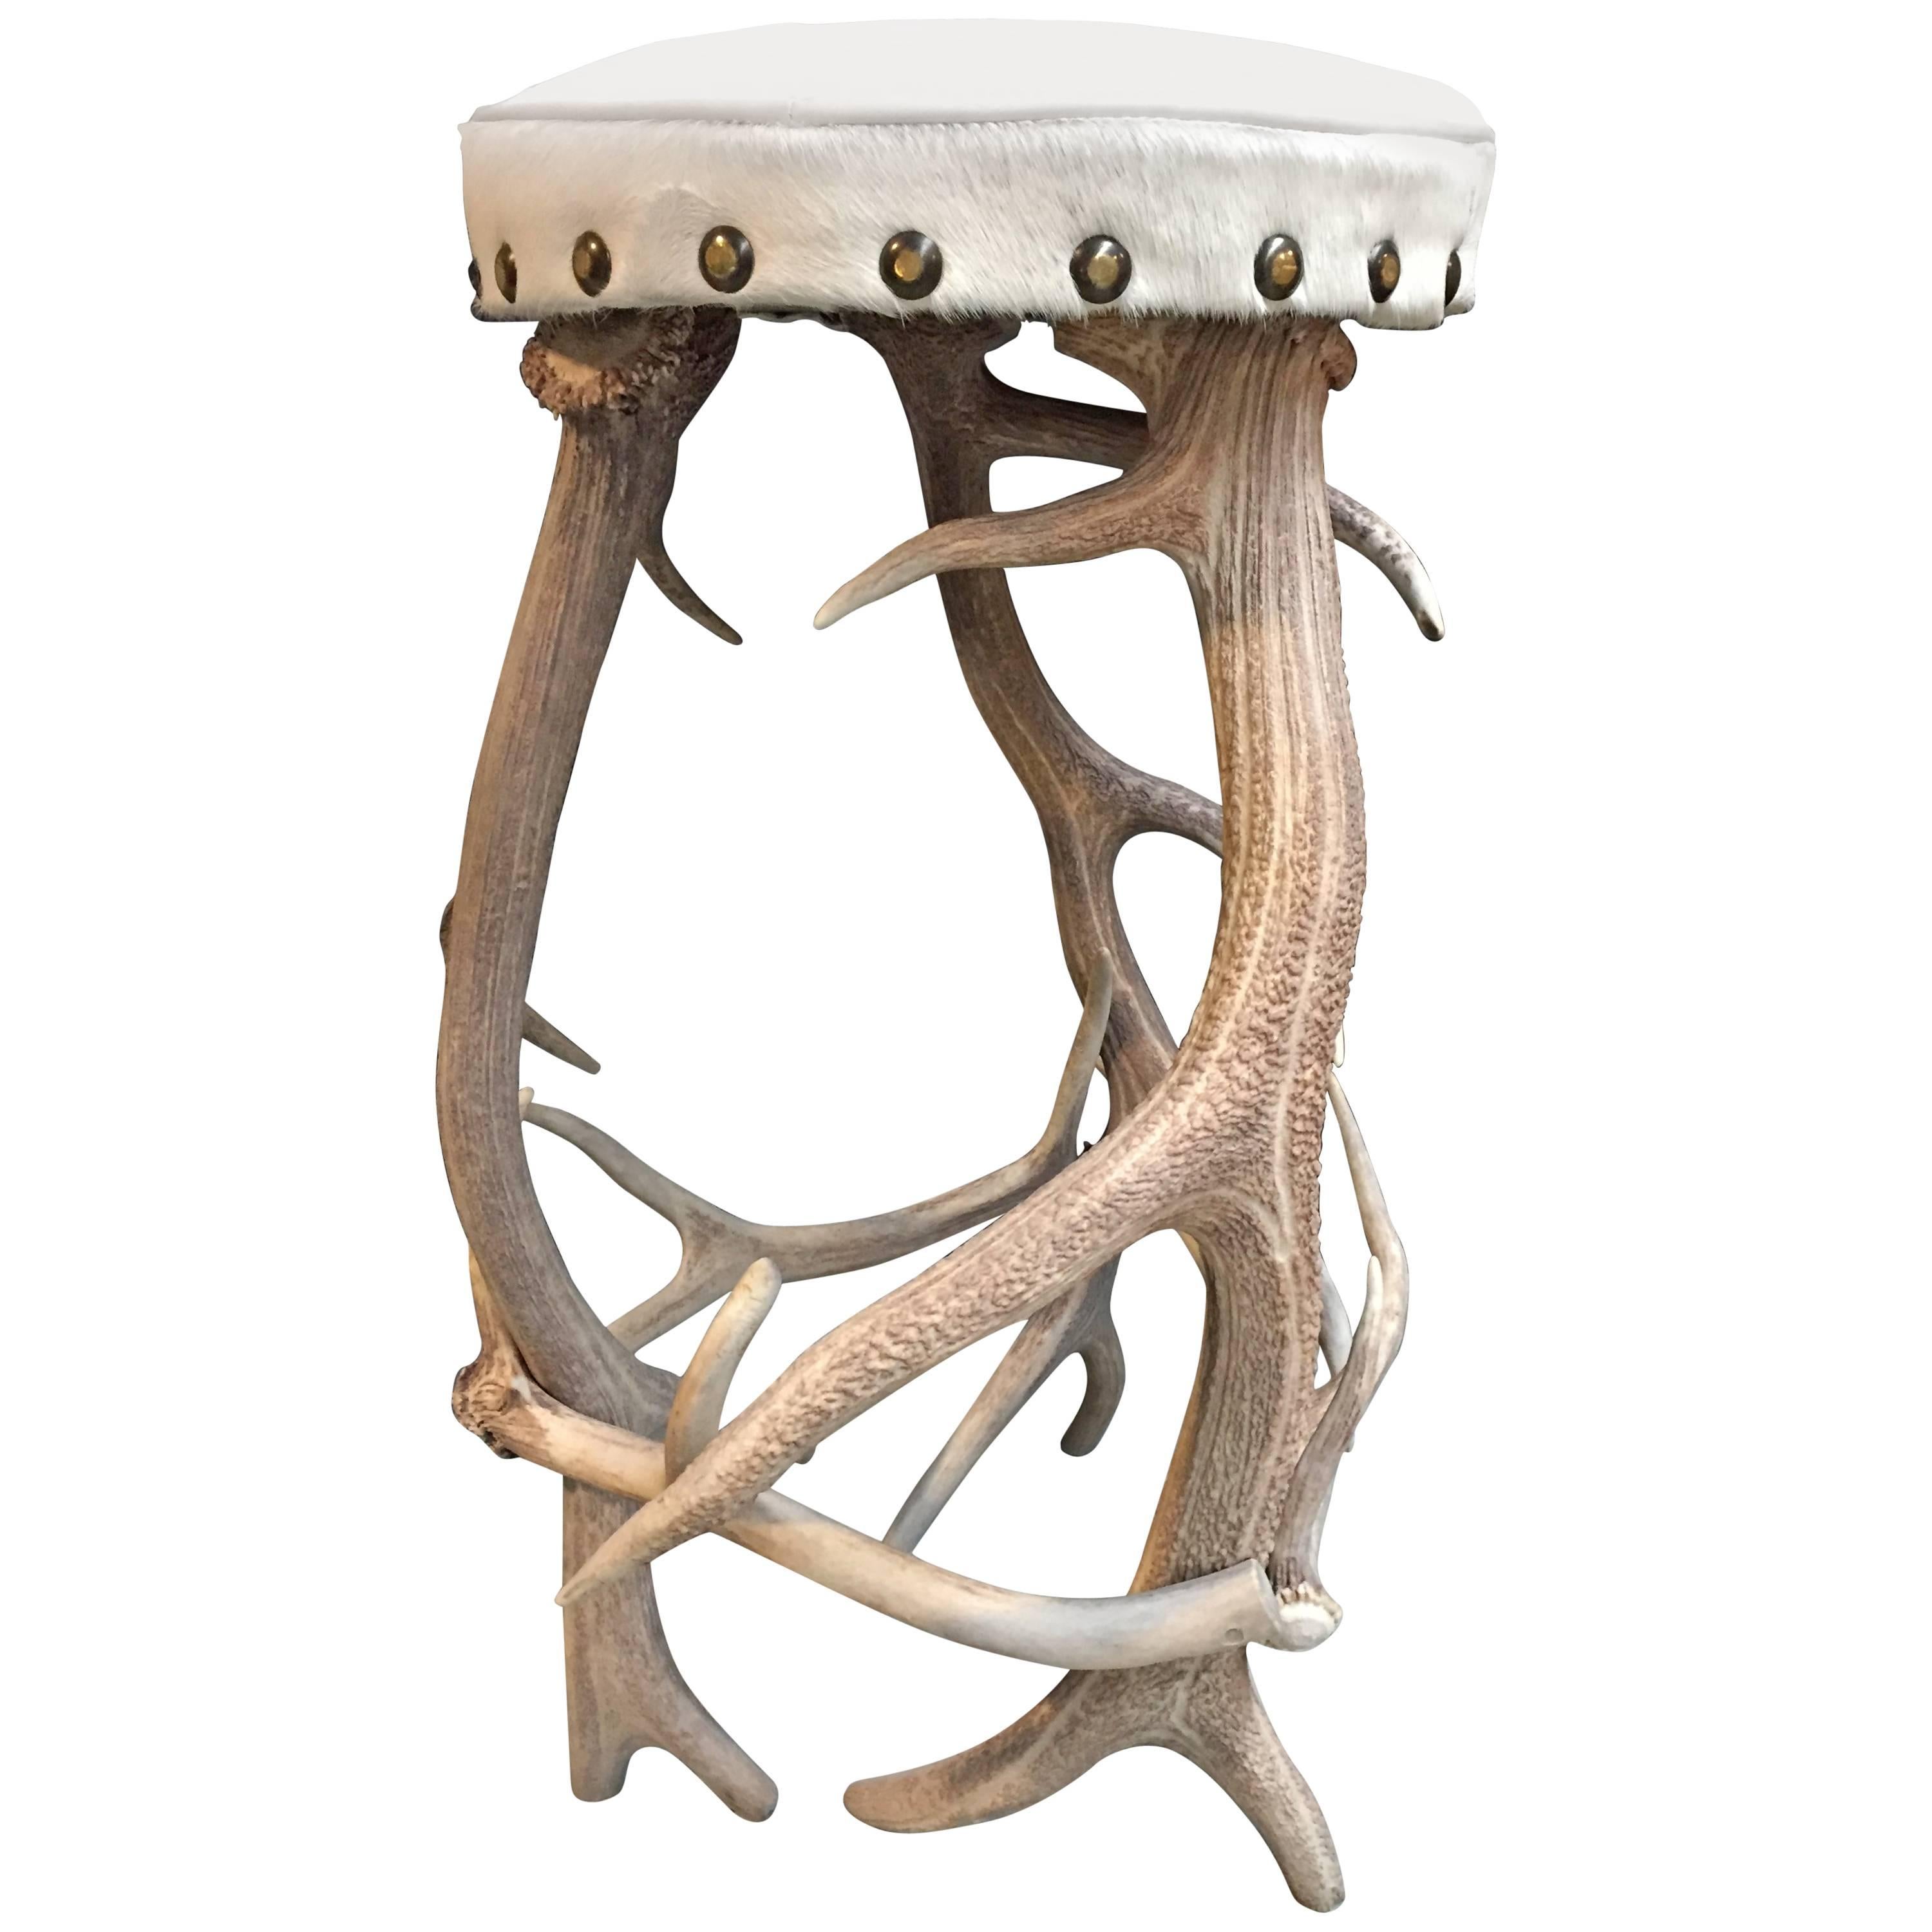 4 x Antler Bar Stool with cowhide upholstery